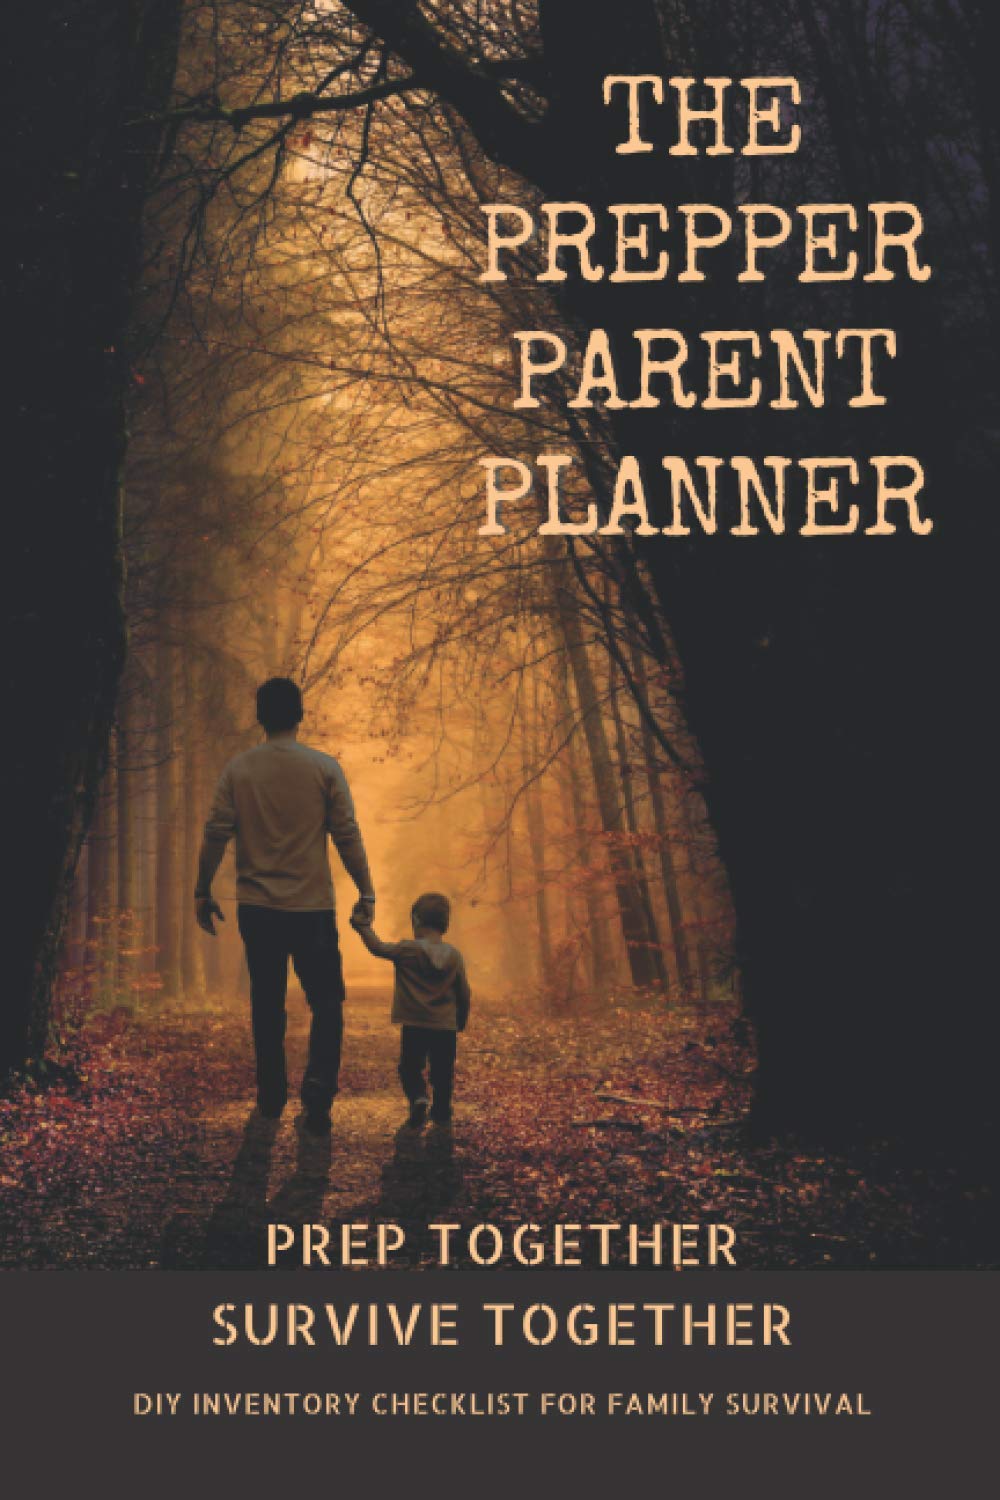 The Prepper Parent Planner – A DIY Inventory Checklist for Family Survival: Prep Together, Survive Together – Be Prepared for Any Emergency – Gift for … Survivalists, Wilderness Experts, Hunters